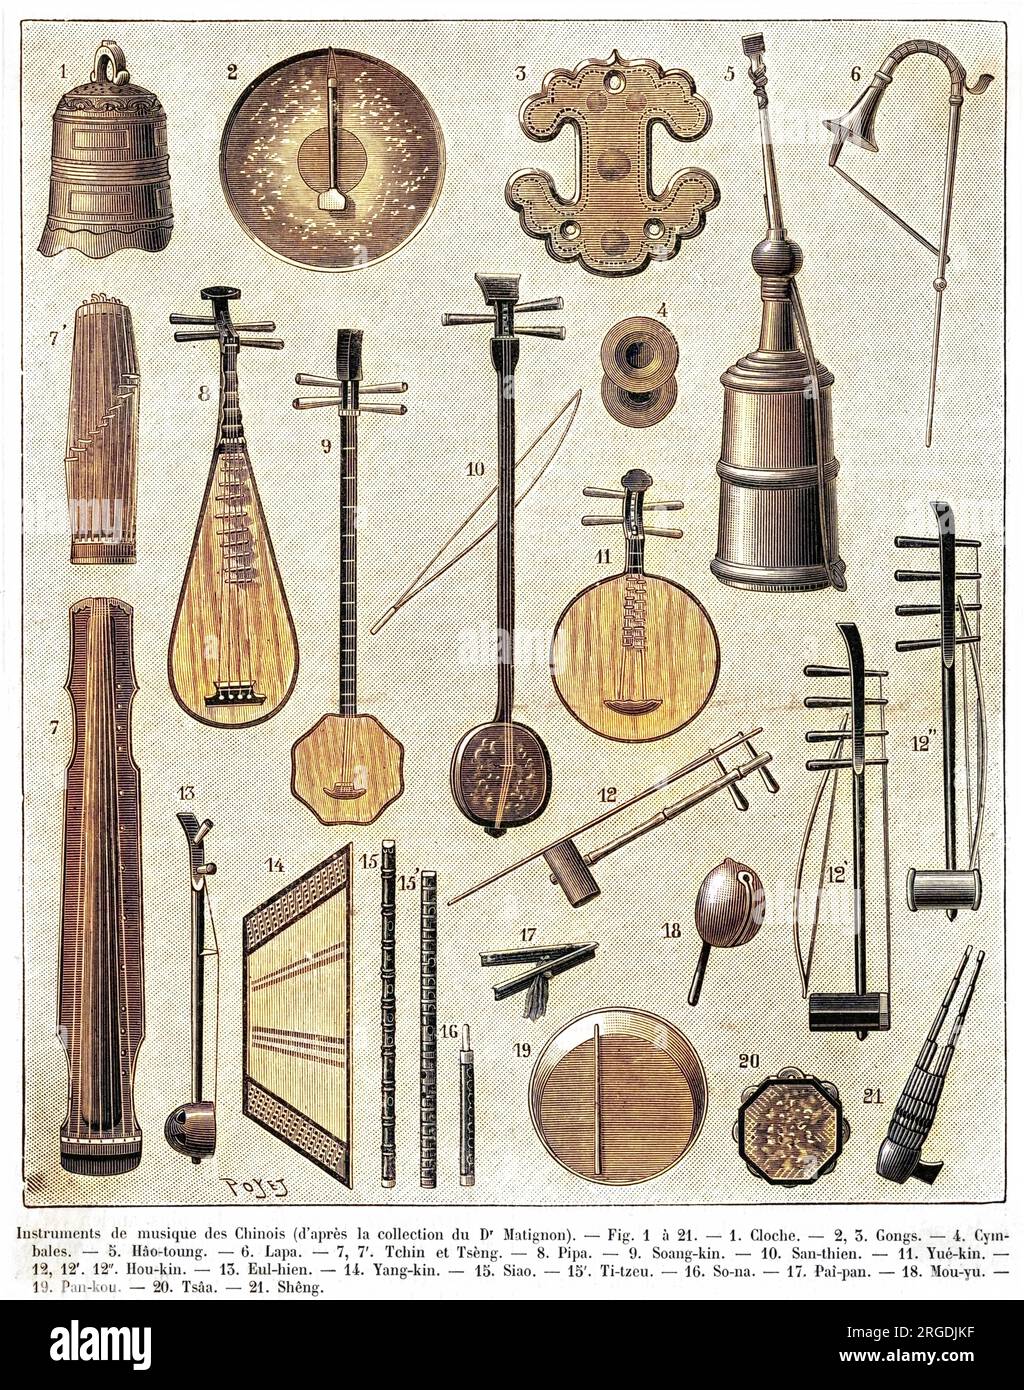 A selection of Chinese musical instruments, including a bell(1),gong,(2), cymbals(4),a guqin or seven-stringed zither(7), a pipa or four-stringed lute (8), Yueqin or moon-shaped lute(11),shamisen(10), erhu or spike fiddle(13)Yang-Qin(also known as the yangkin or Chinese dulcimer)(14),Xiao(also known as siao or flute)(15)and sheng(21). Stock Photo